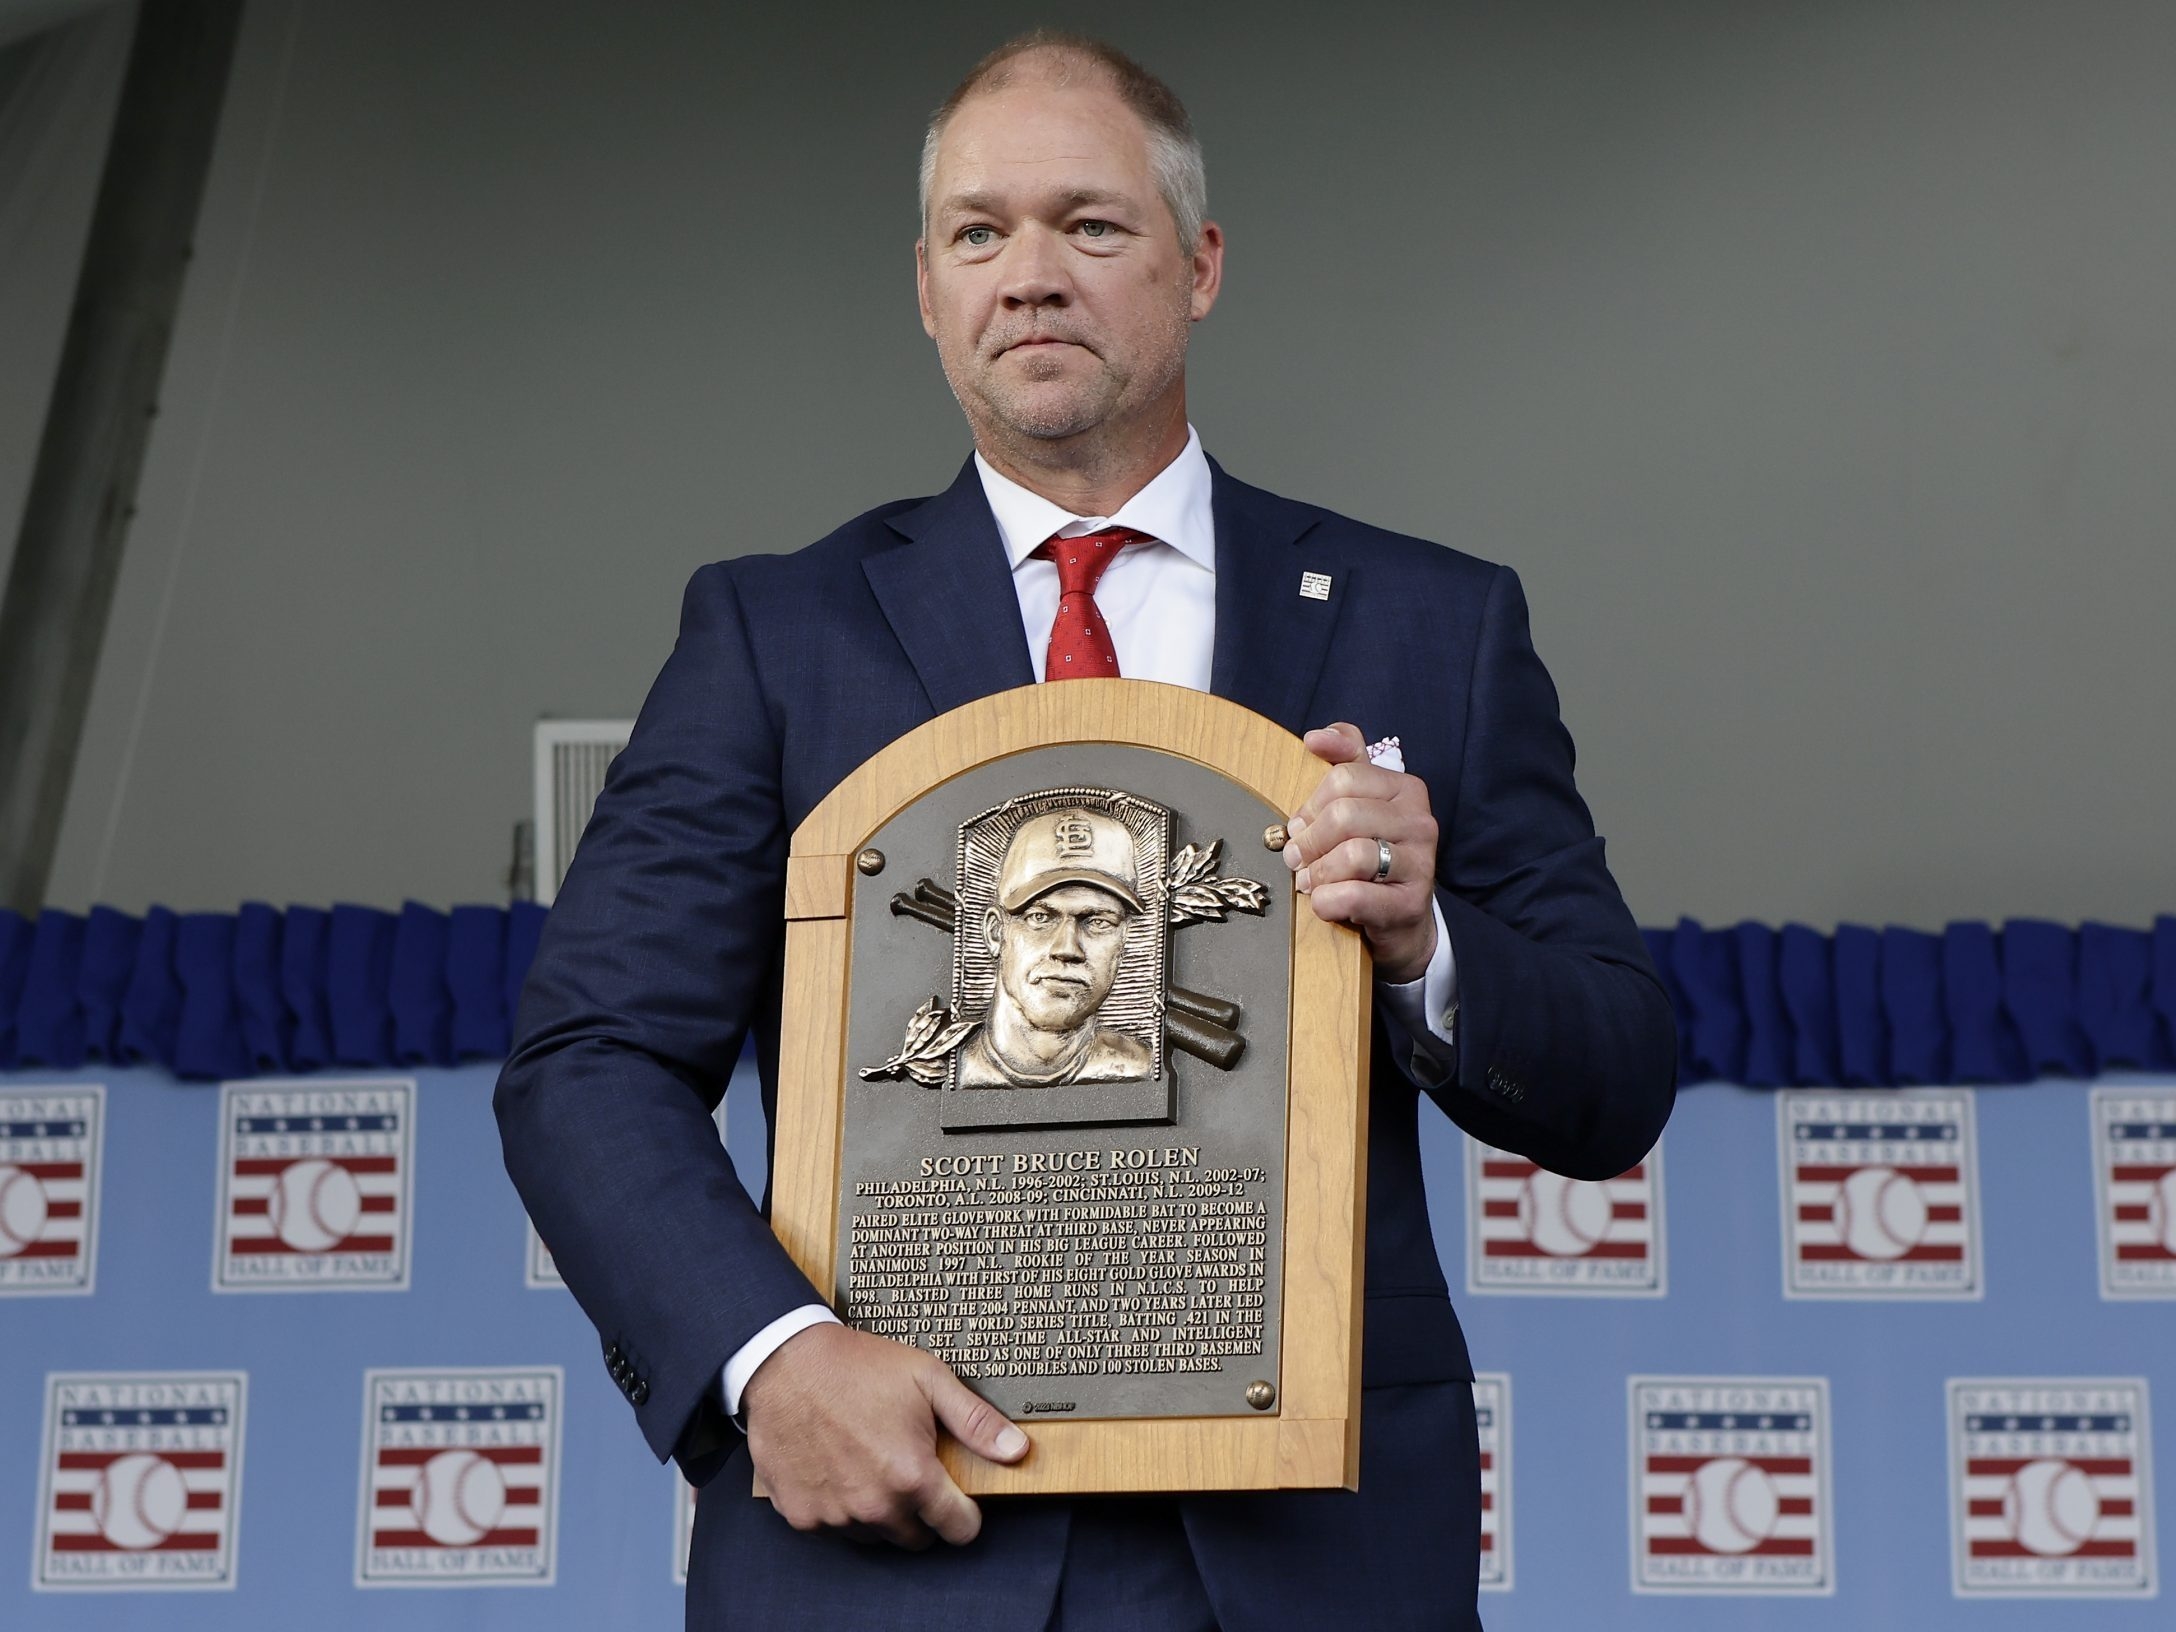 Hall of Fame: Fred McGriff and Scott Rolen Are Connected in Their